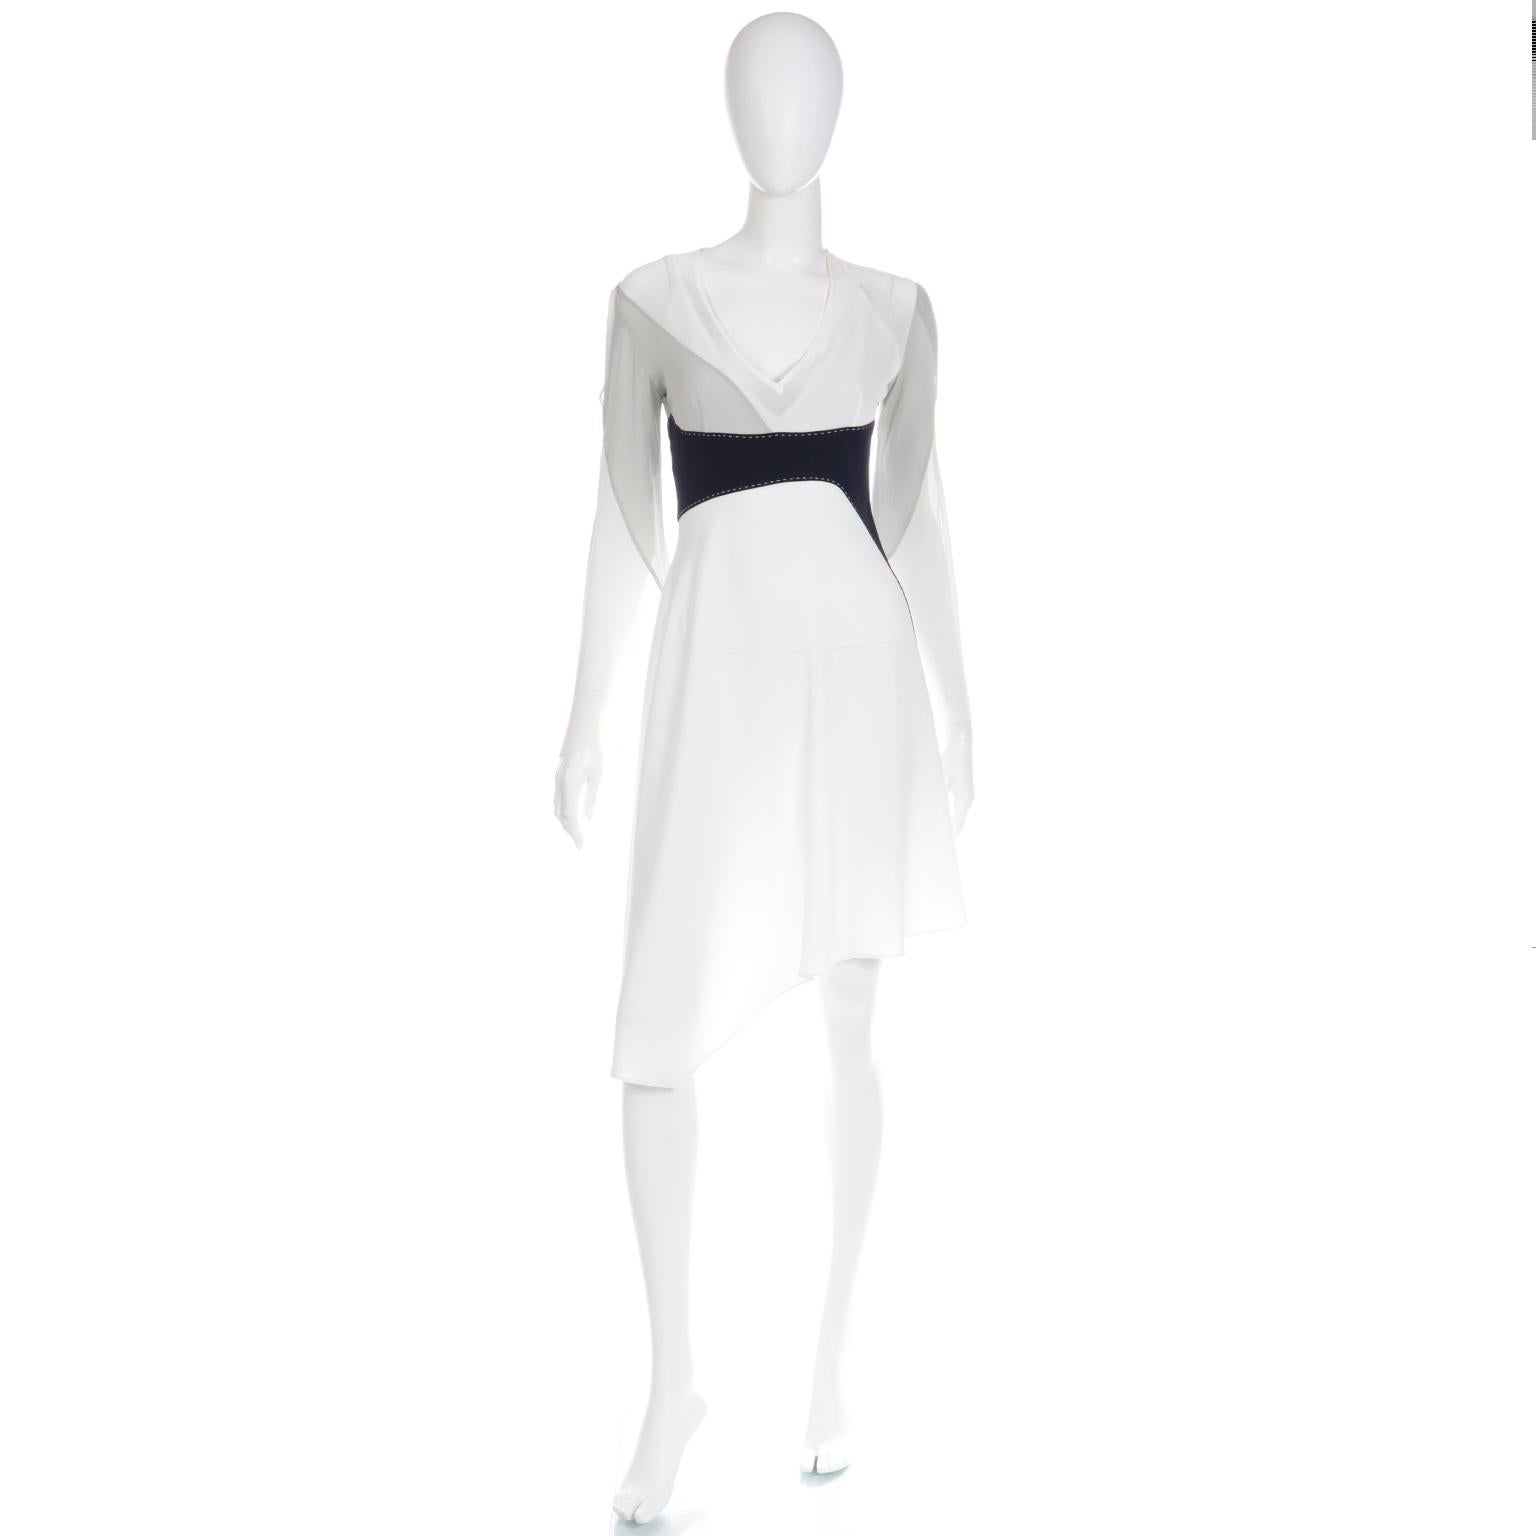 We love this this lovely Gattinoni Tempo silk vintage dress. This avant garde dress is in a fine silk crepe in color blocked shades of white, grey and black. The black fabric has intricate white hand stitching details and we especially love the